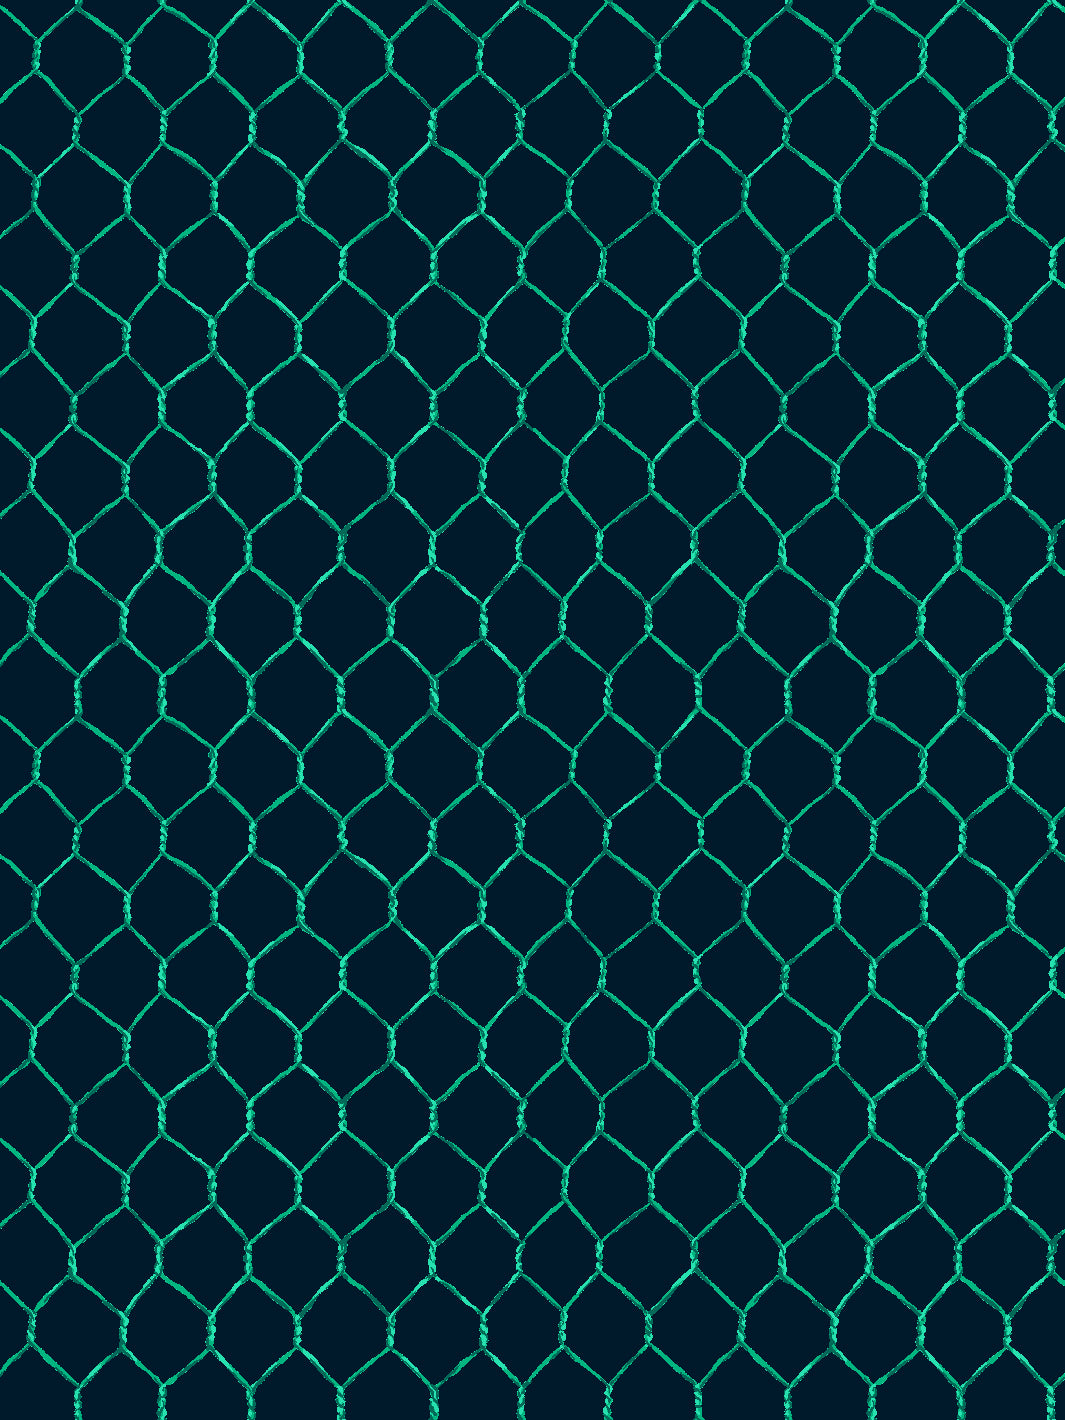 'Evelyn's Chicken Wire' Wallpaper by Sarah Jessica Parker - Emerald on Navy